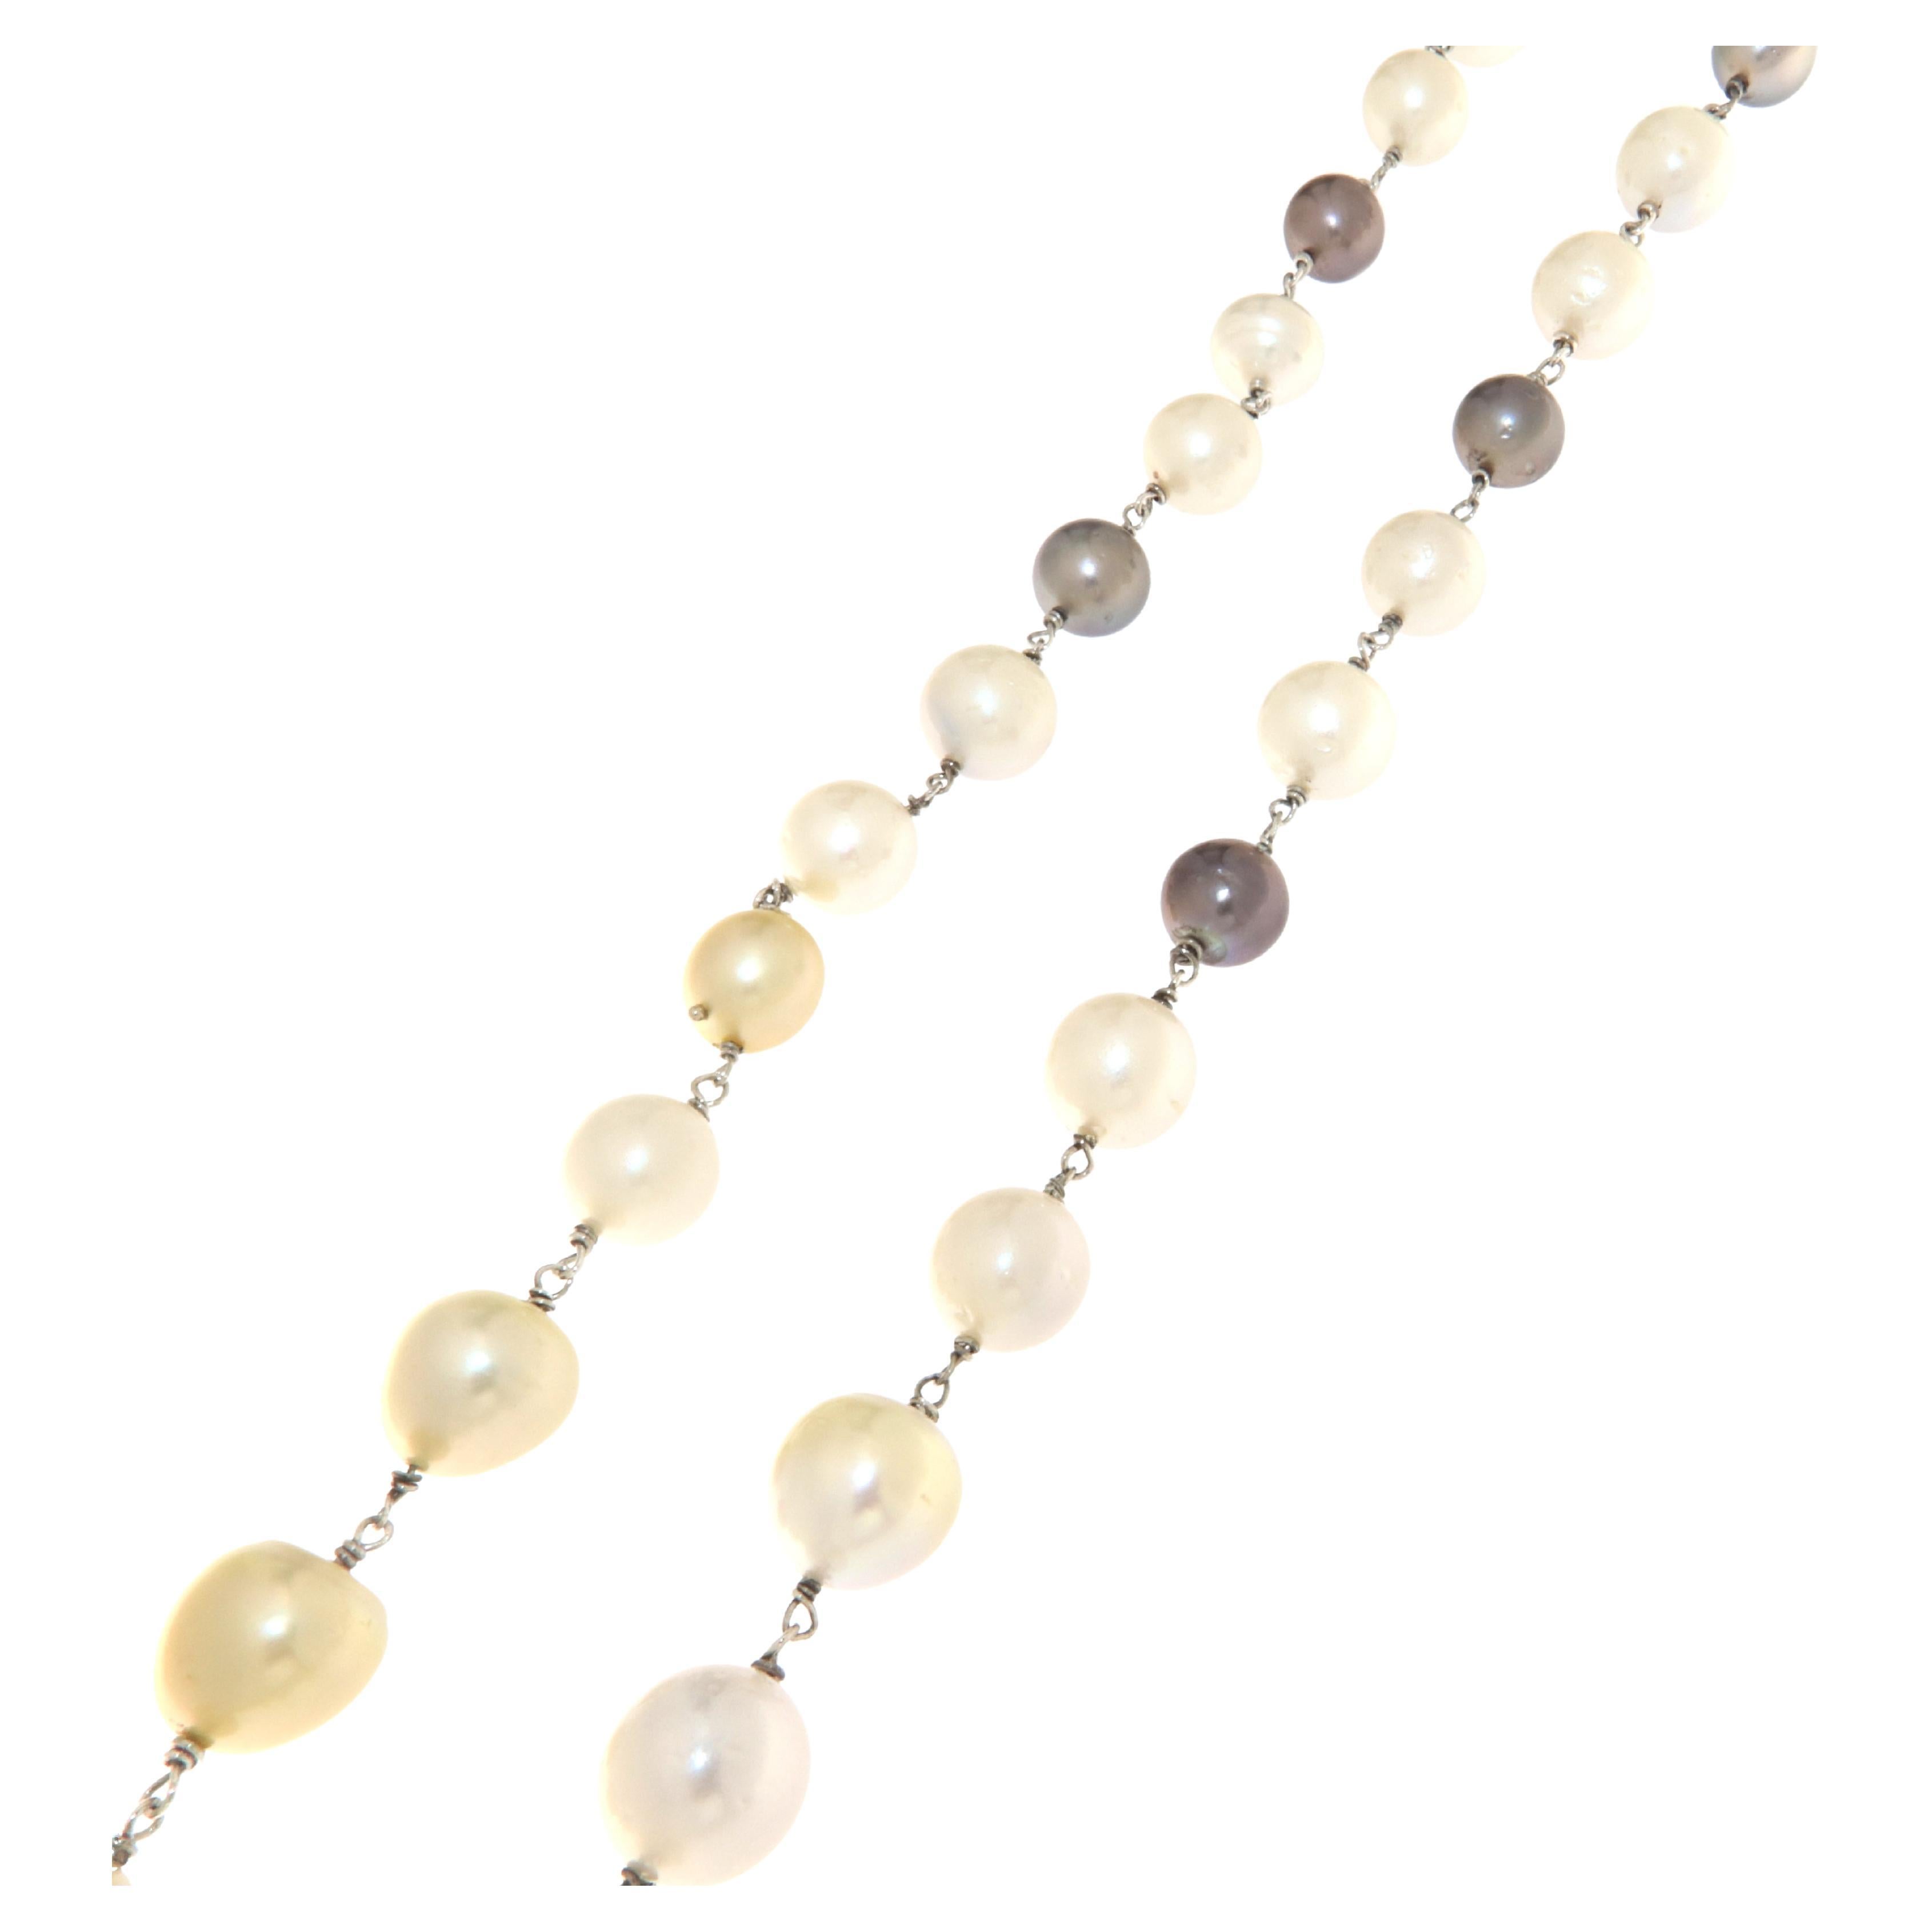 This sophisticated necklace is a testament to style, crafted entirely with South Sea pearls and adorned with a 14-karat yellow gold clasp that adds a touch of sun-warmed elegance and sophistication. Each pearl, chosen for its unique qualities,